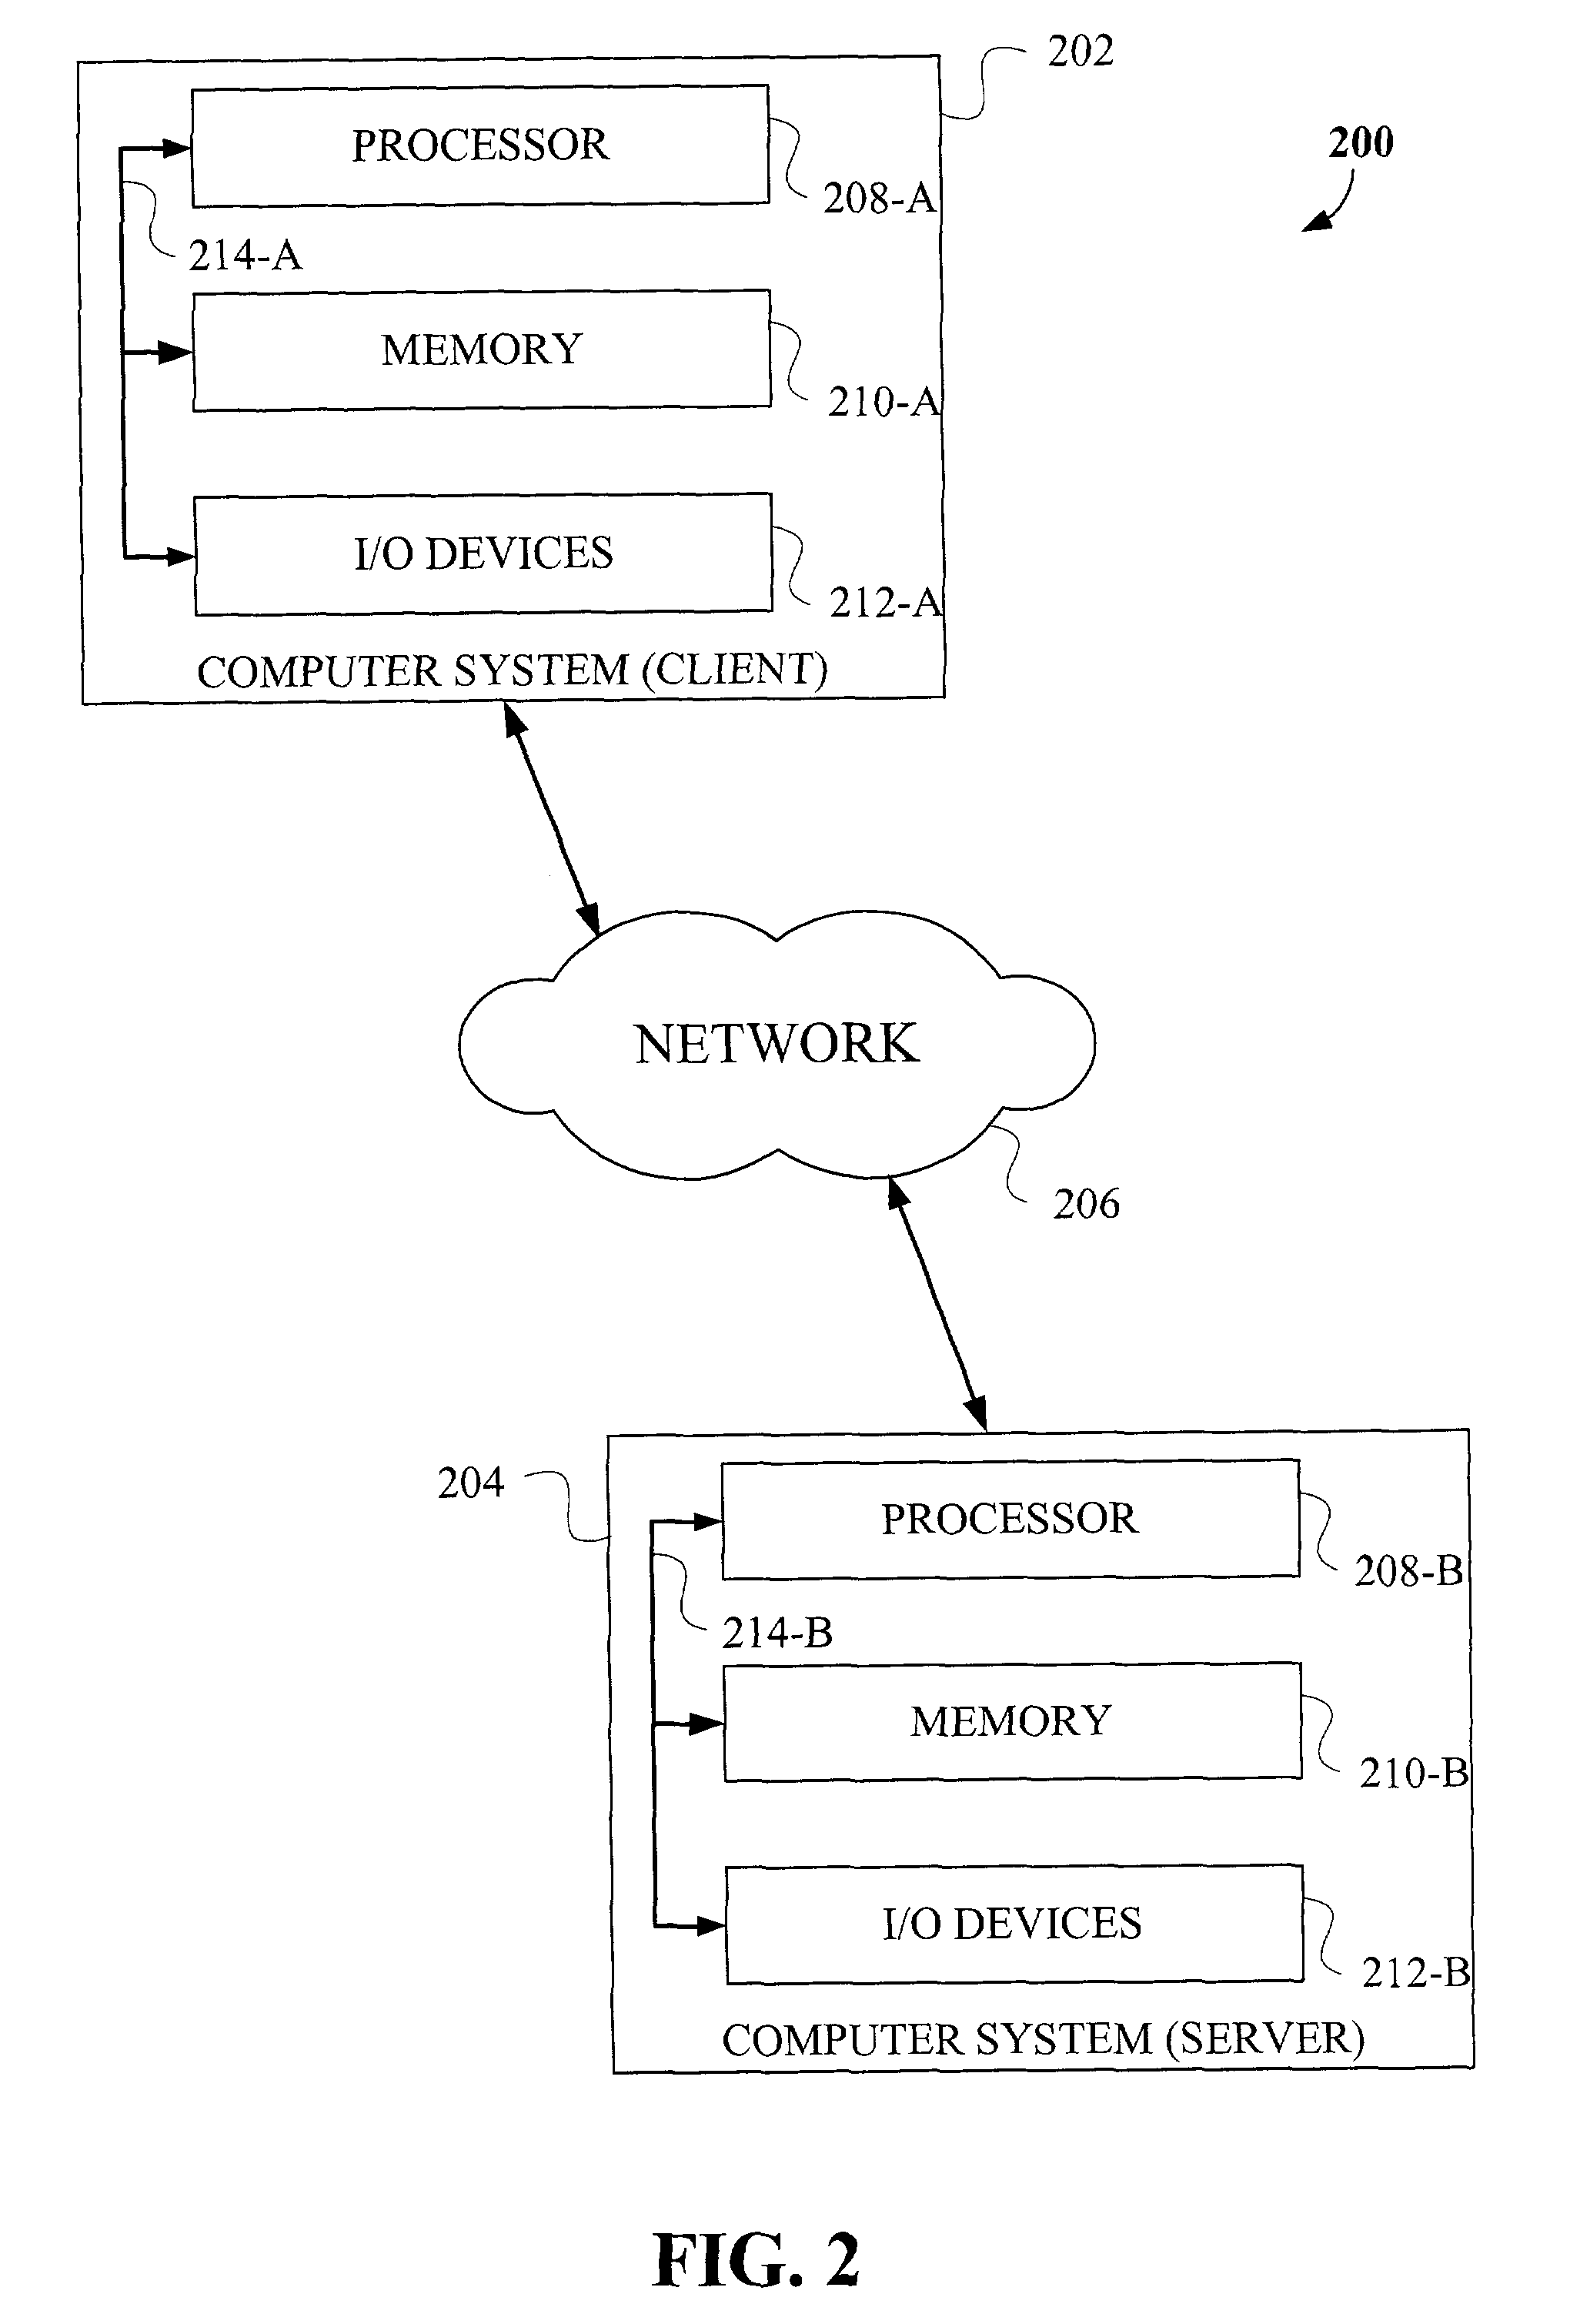 Methods and apparatus for dynamic user authentication using customizable context-dependent interaction across multiple verification objects